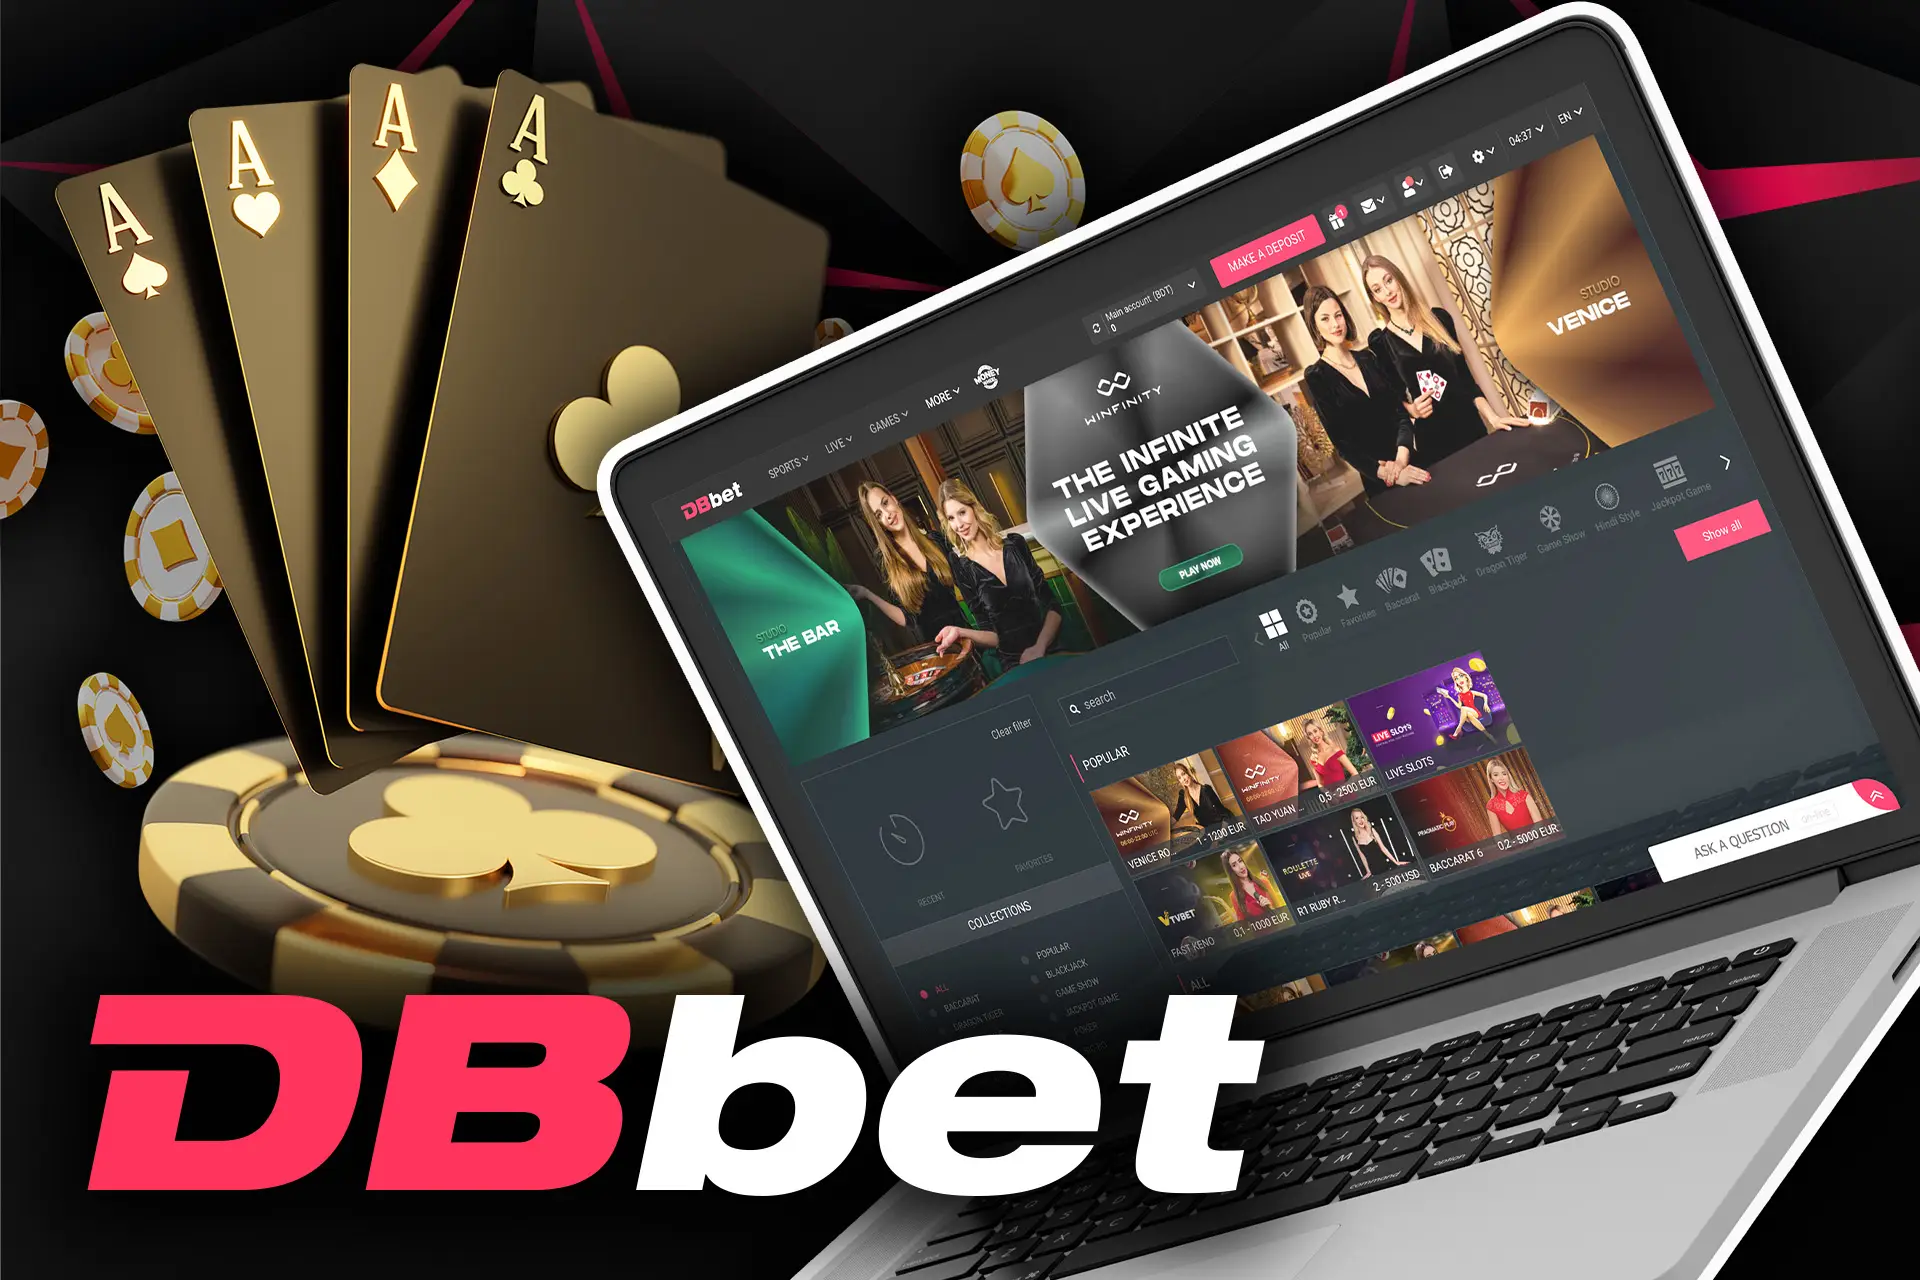 Live casino games are available to you on DBbet.